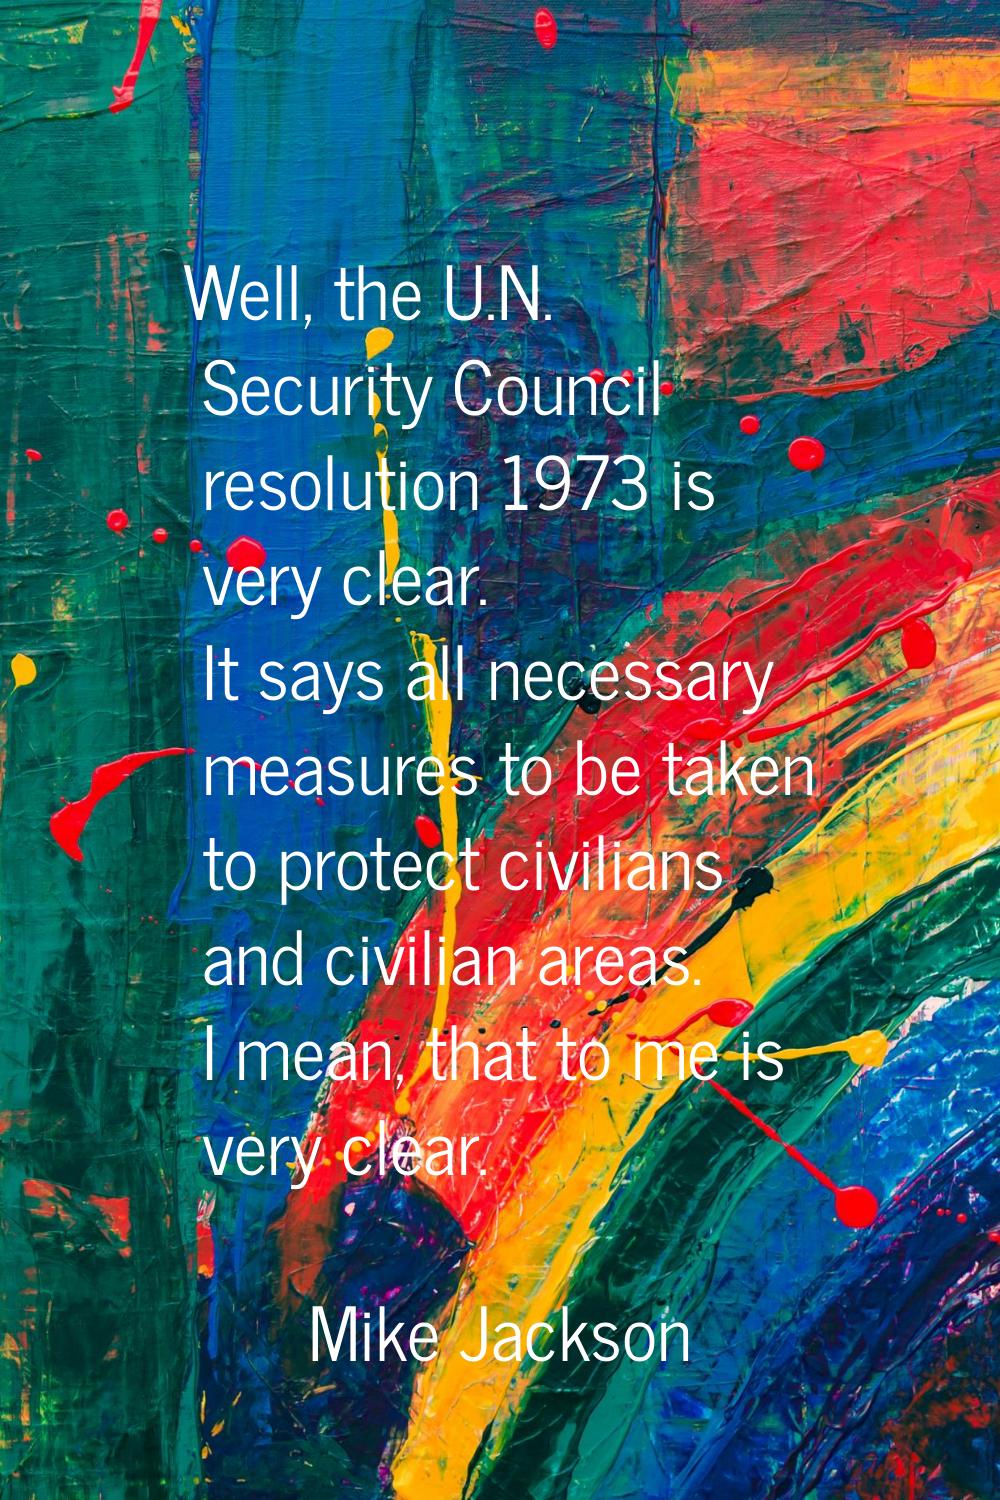 Well, the U.N. Security Council resolution 1973 is very clear. It says all necessary measures to be